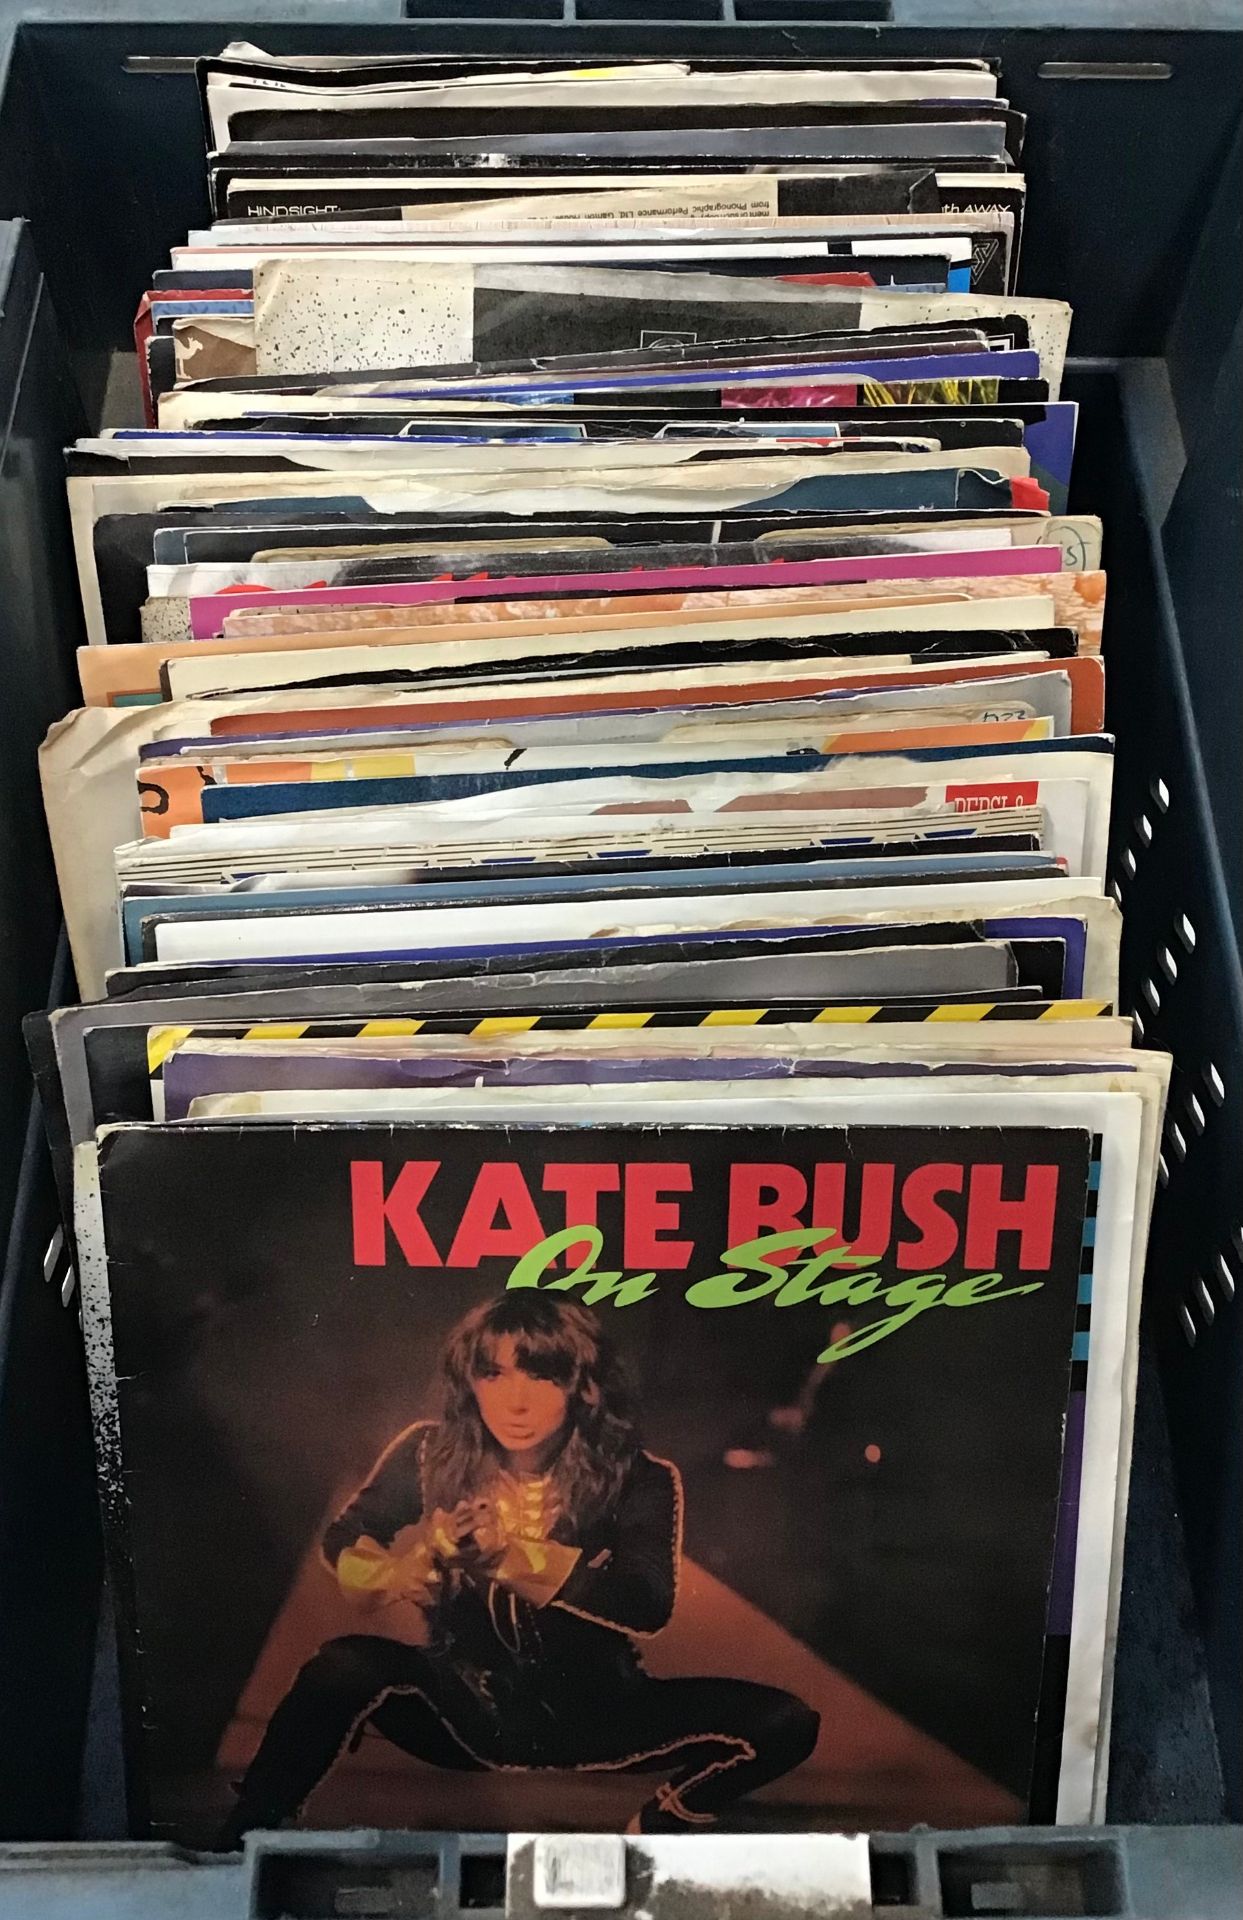 BOX OF VARIOUS 7" SINGLE RECORDS. To include mainly 80's with a little touch of 60's and 70's.